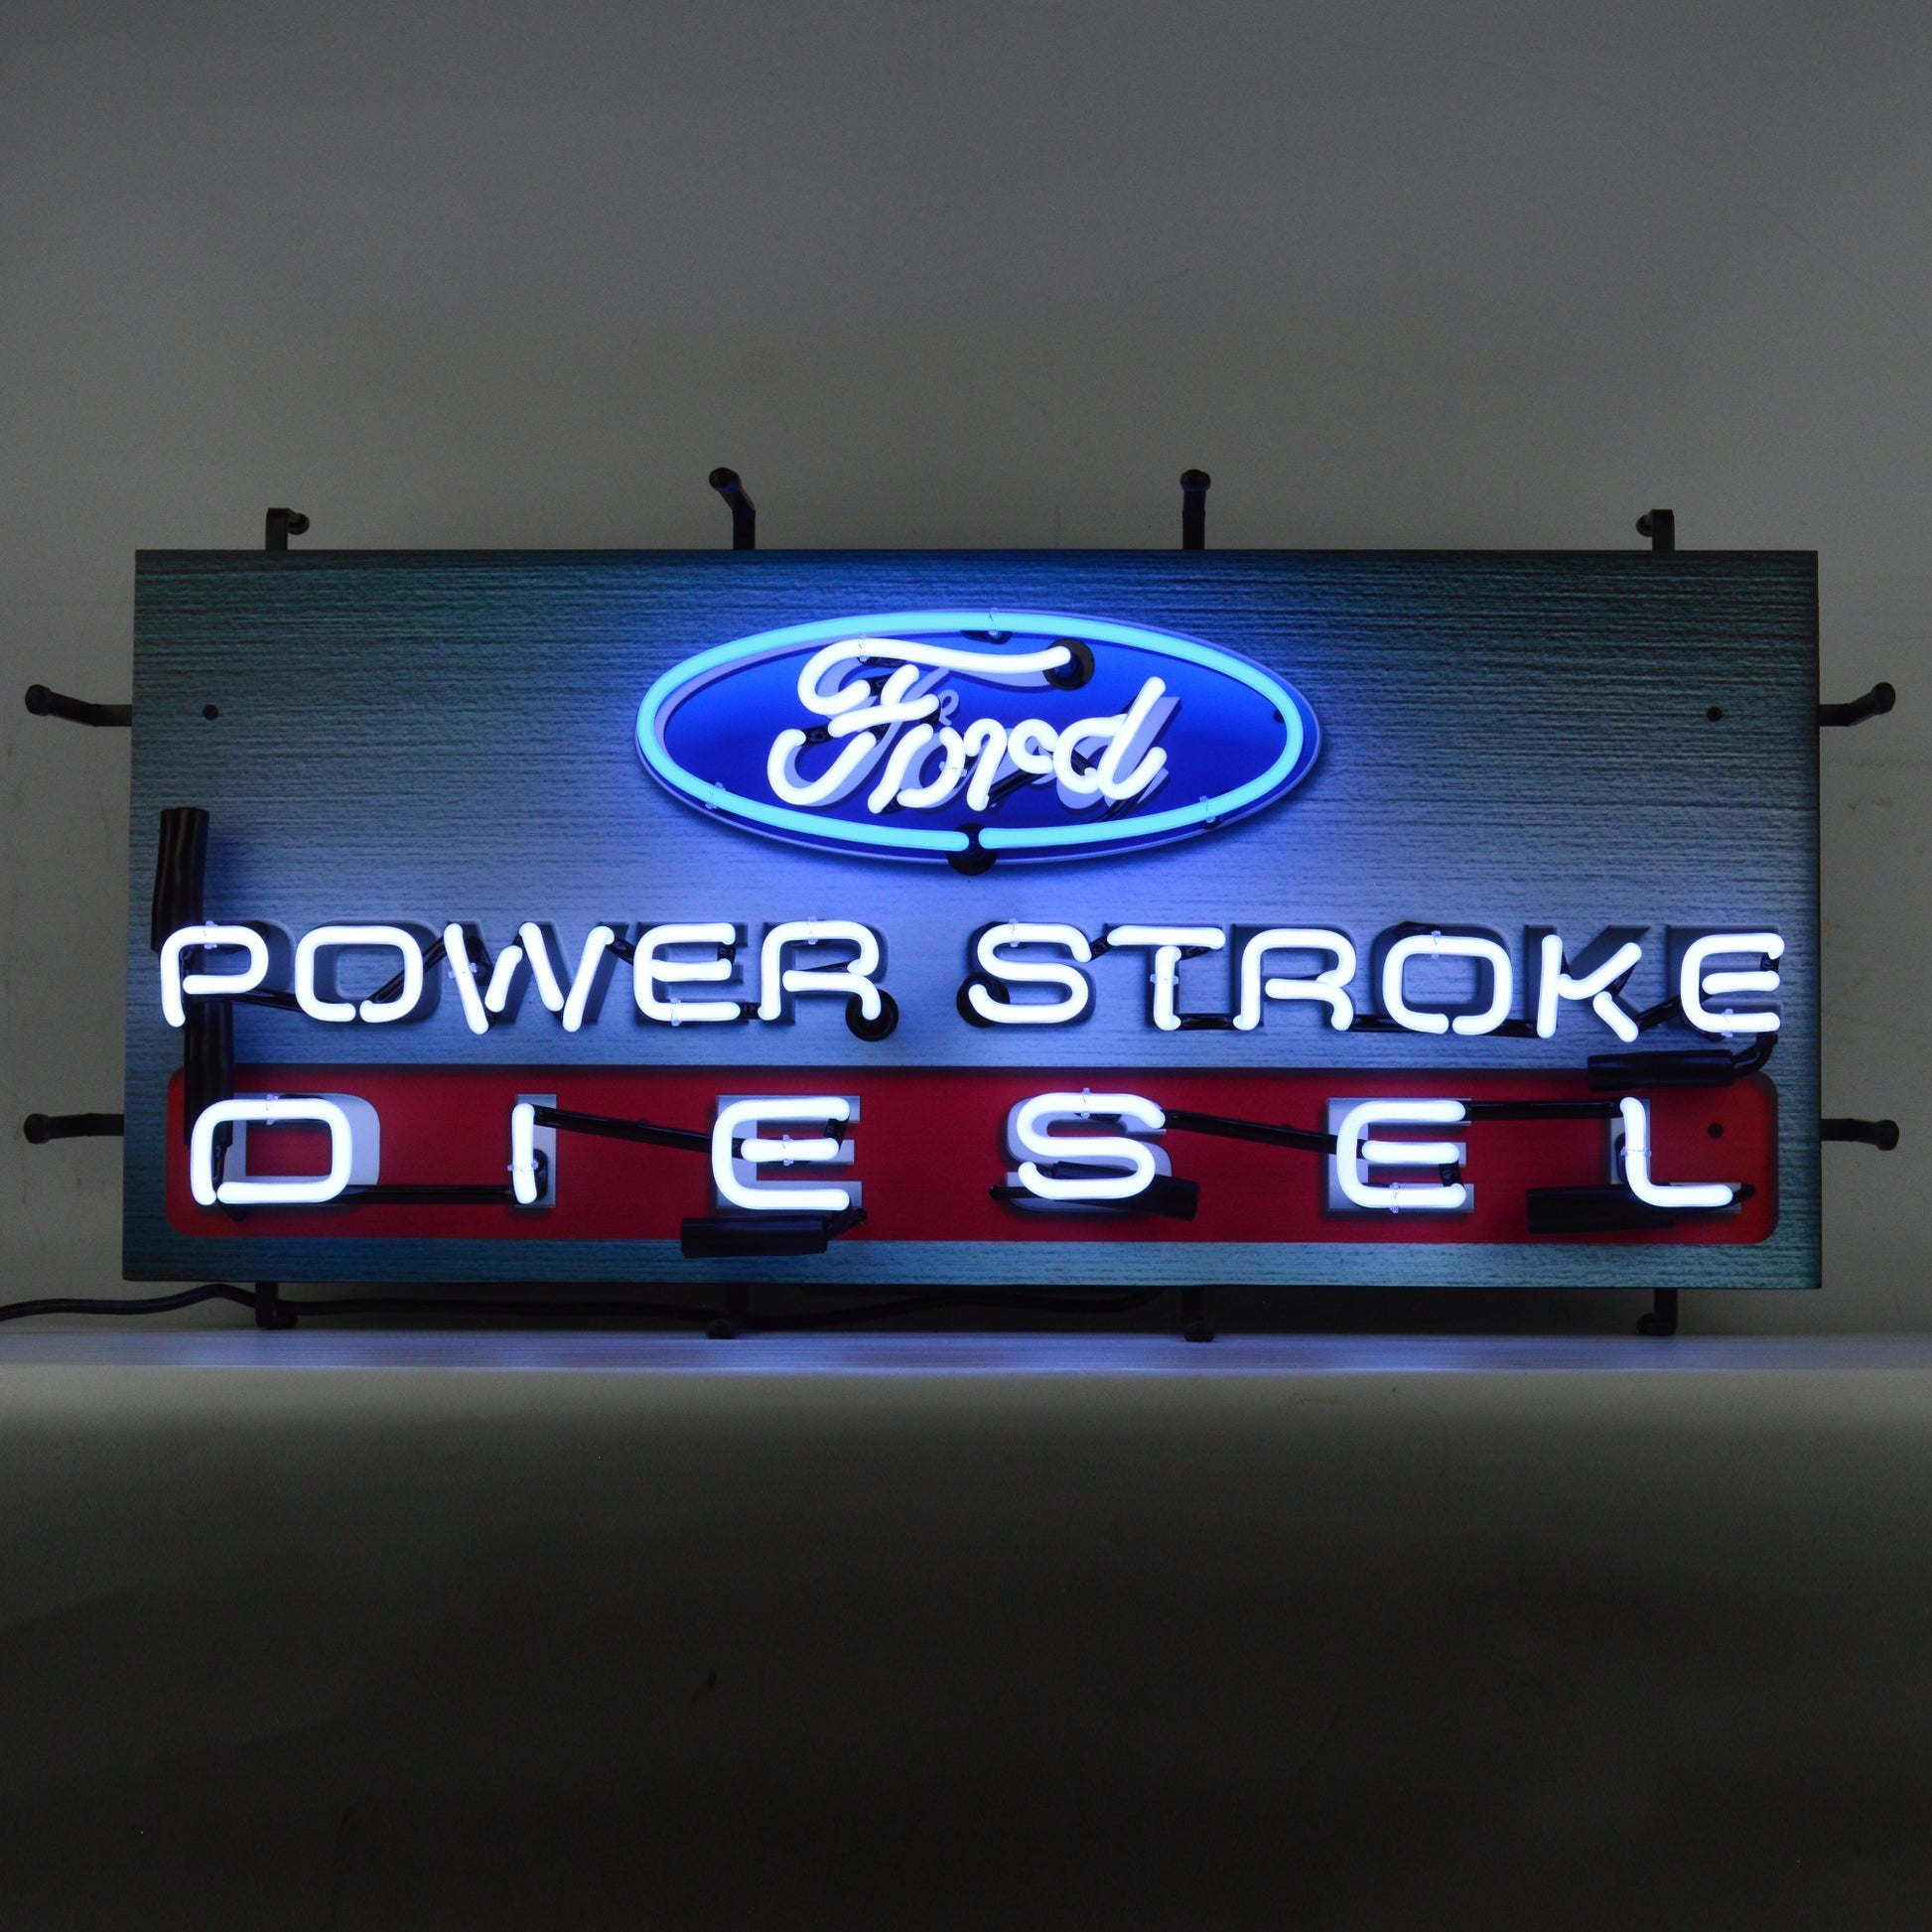 Ford Power Stroke Diesel Neon Sign, 32 inches wide by 15 inches high, with vibrant neon detailing.